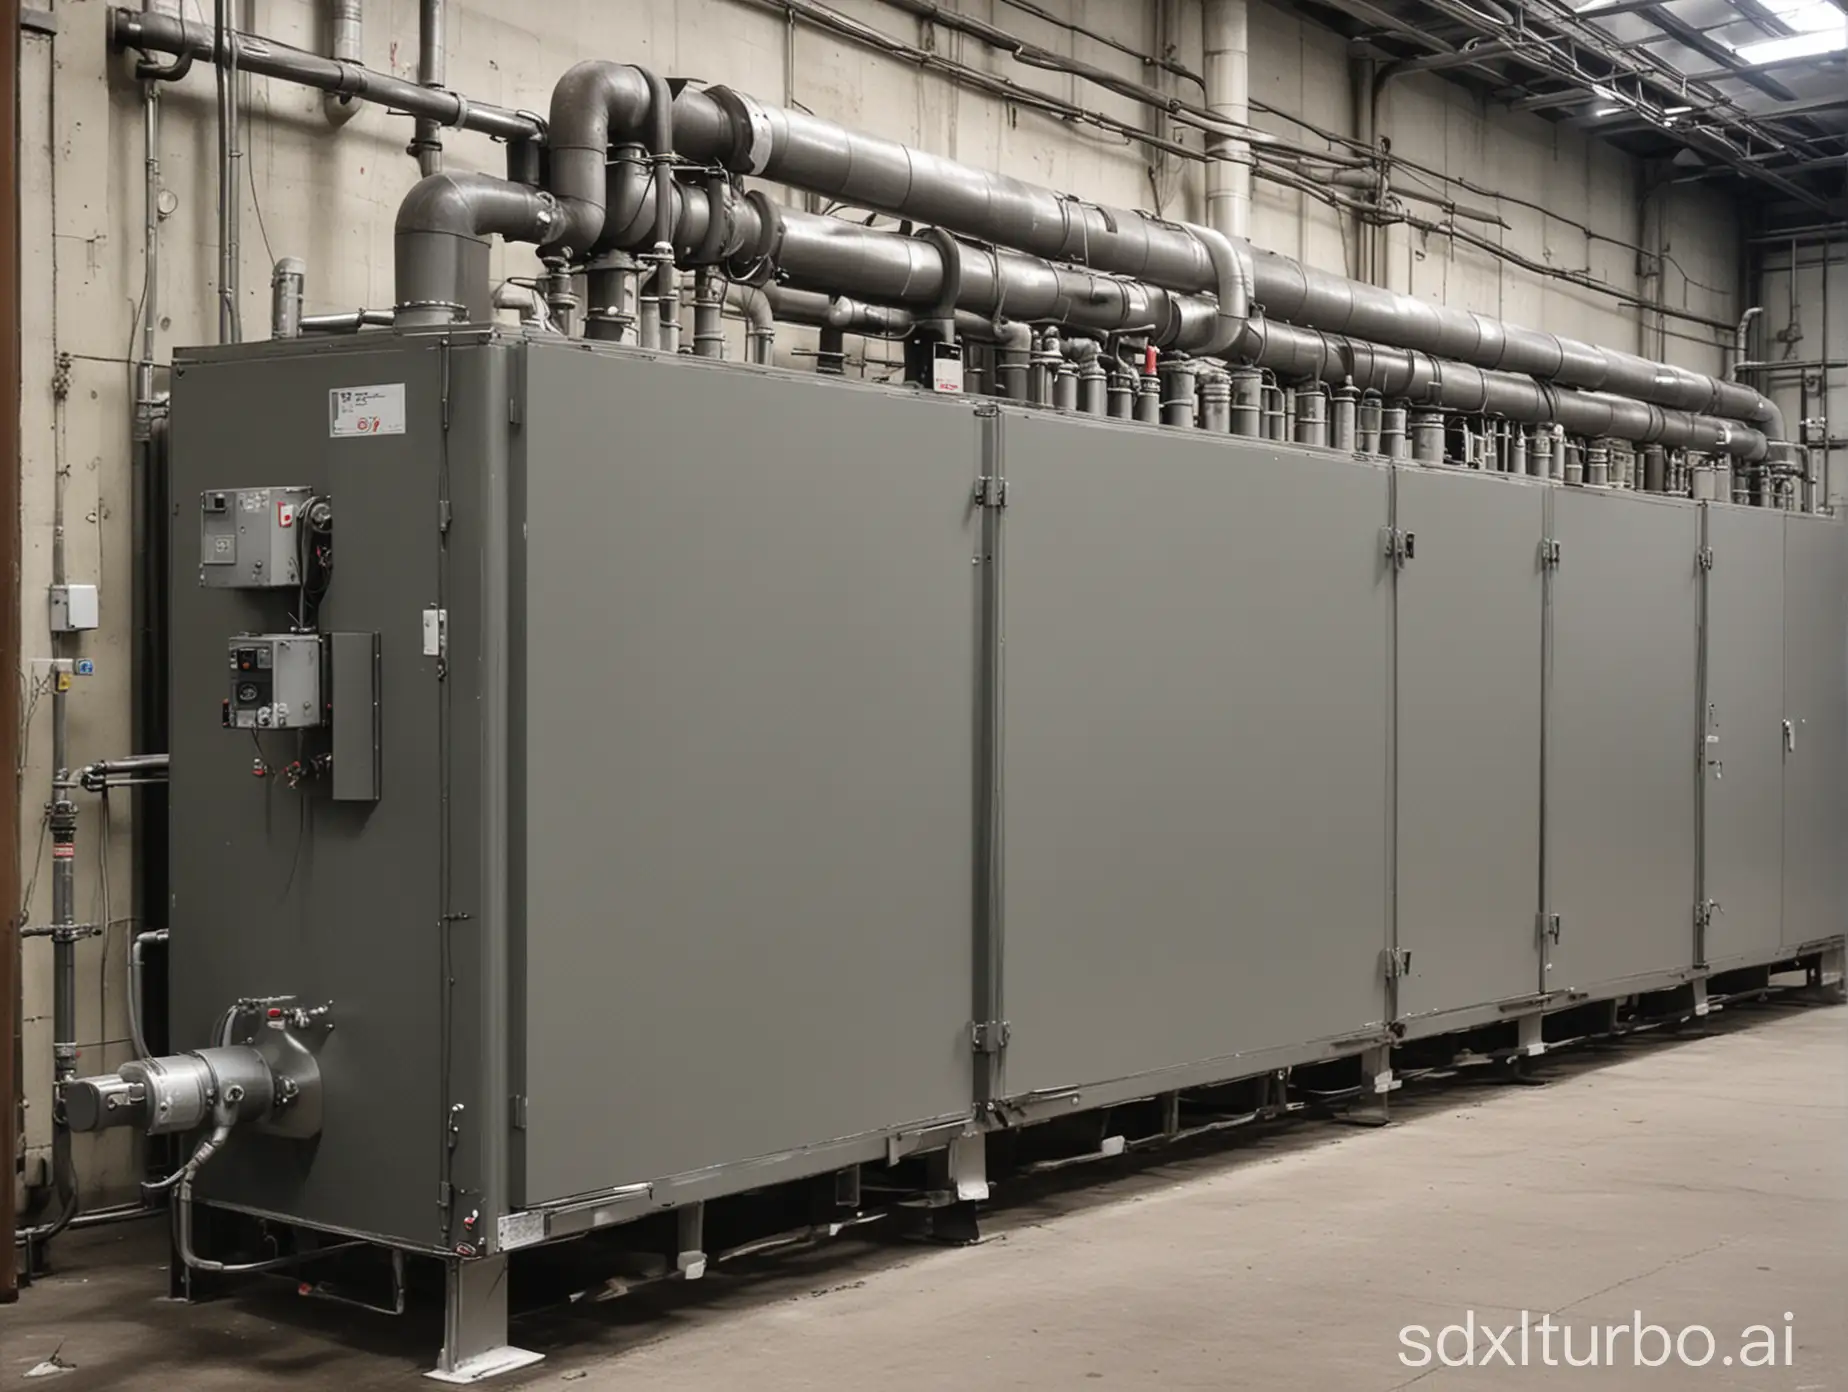 Modern-Industrial-Heating-System-in-Operation